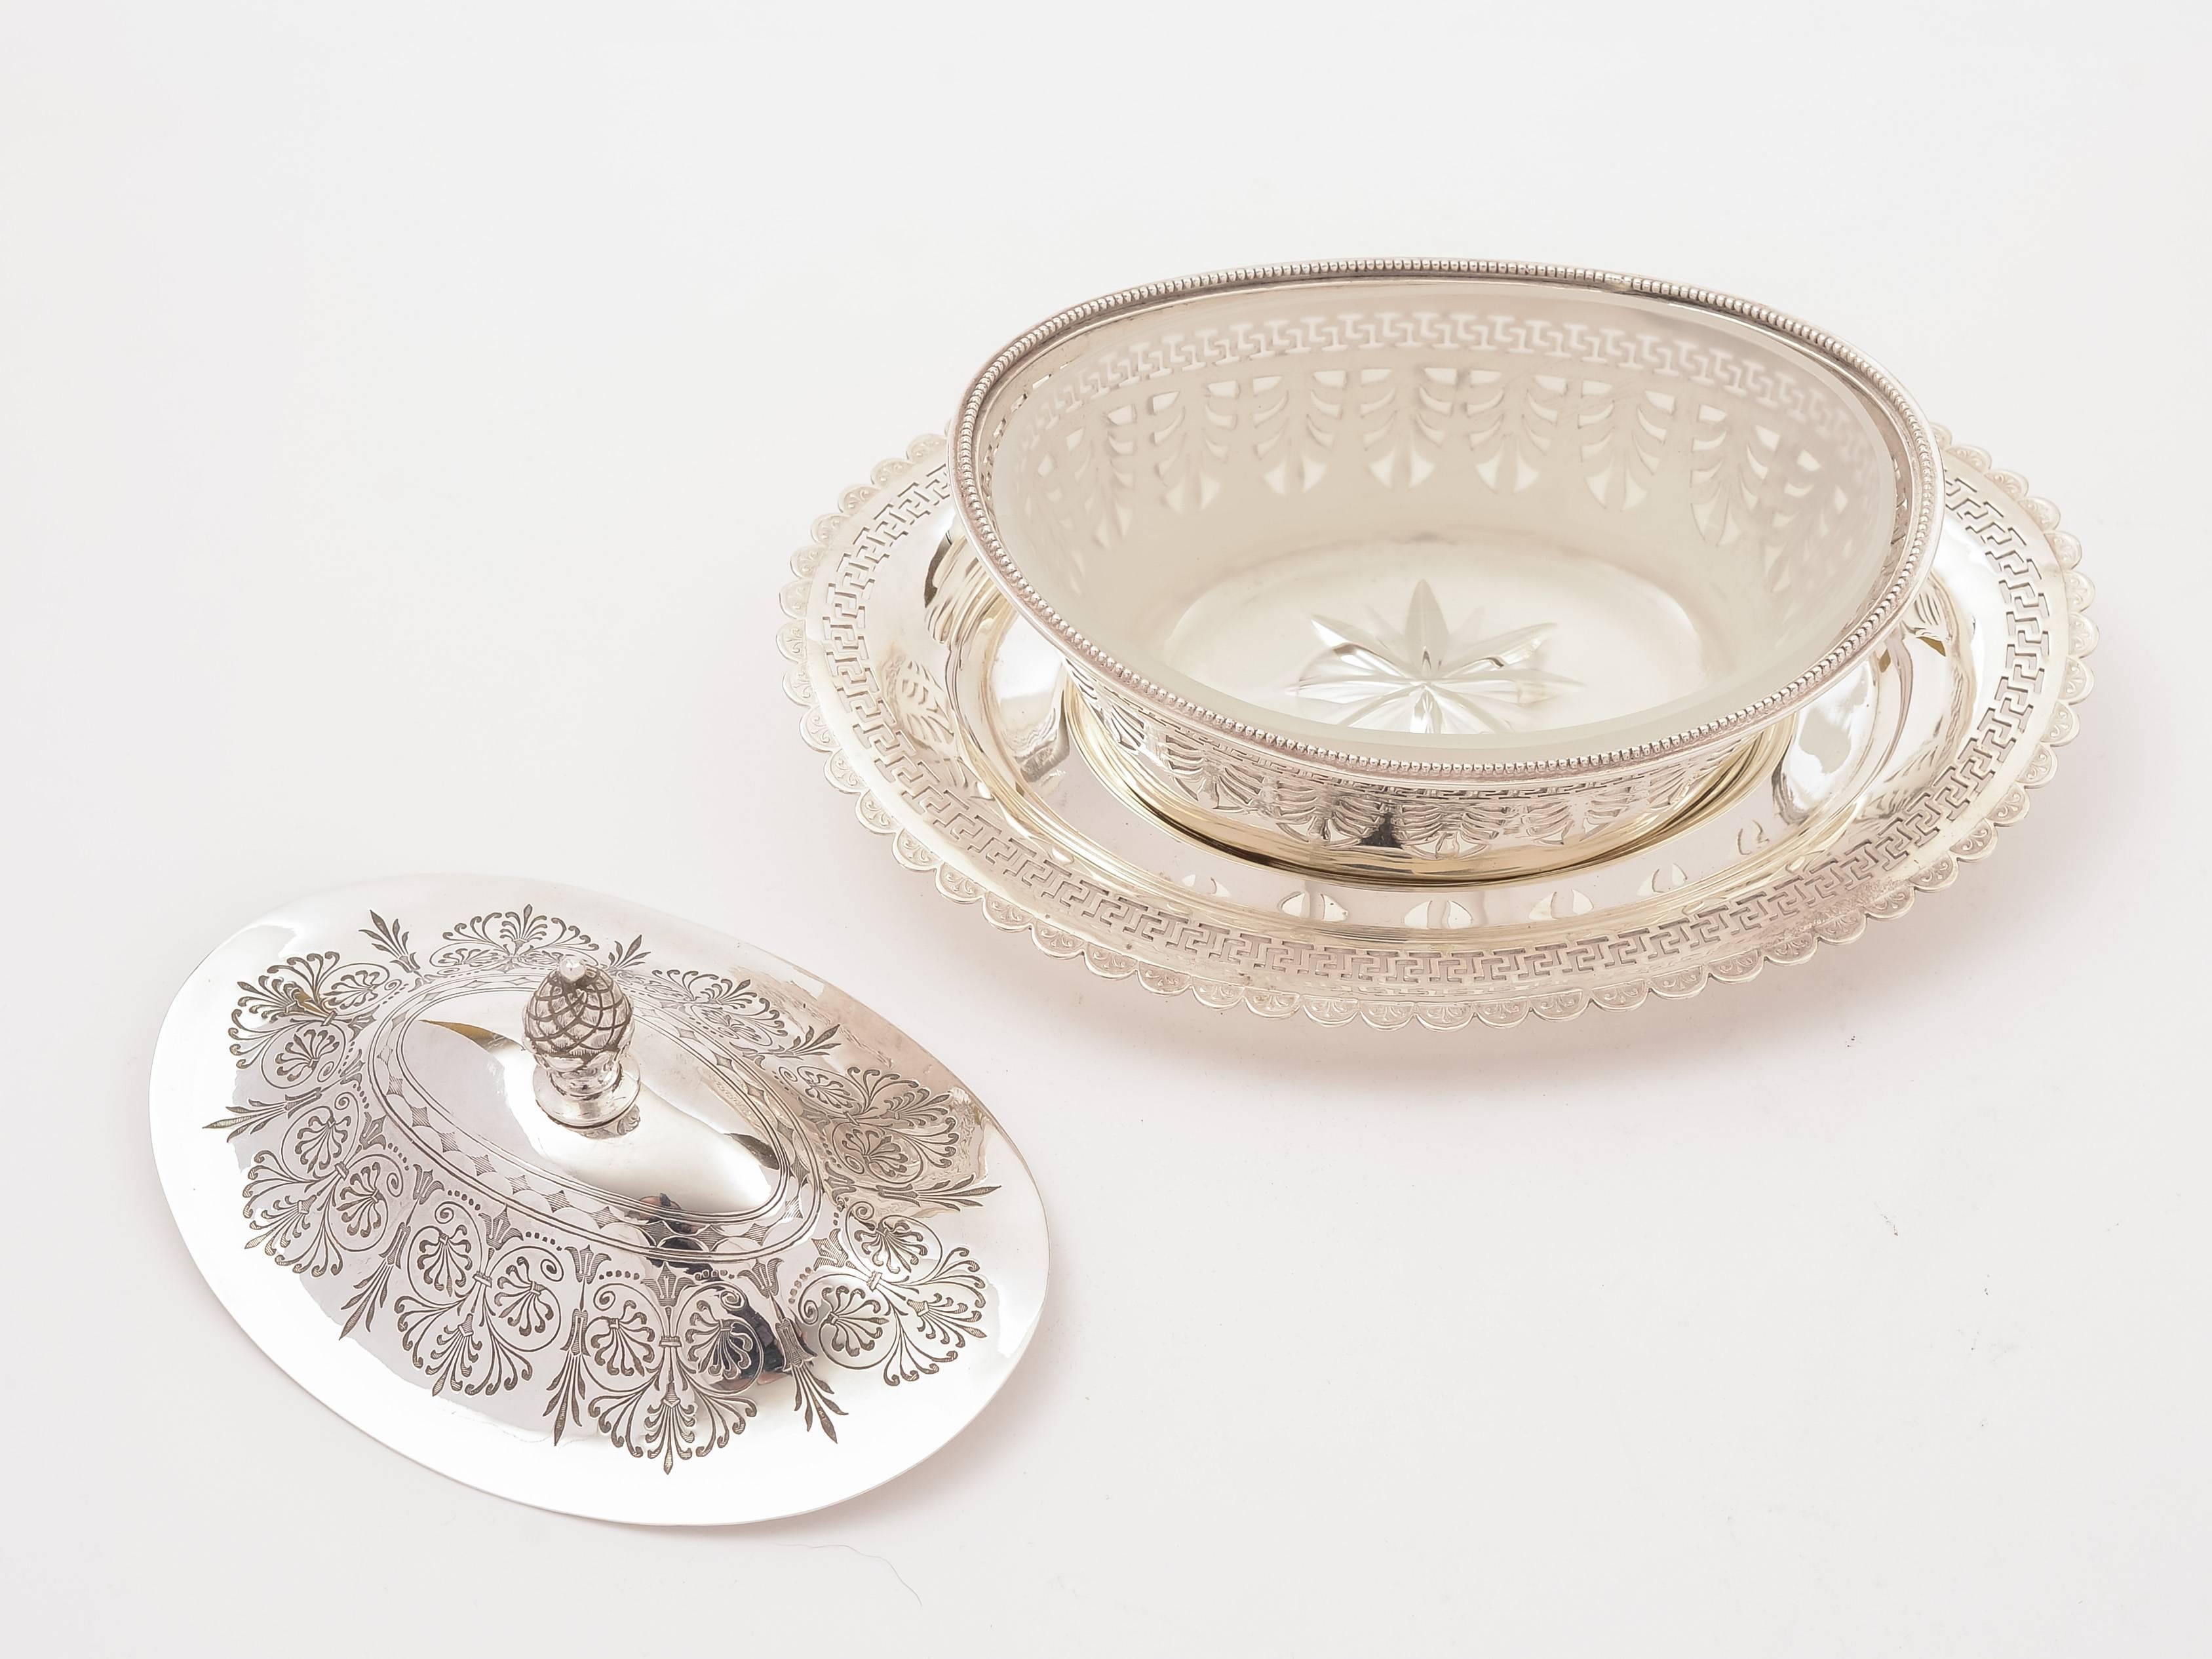 A good English Victorian silver plated butter dish with lovely pierced, embossed and engraved decoration. Sits on val Stand and has frosted glass liner with star cut base, circa 1890.

Measurements:
Height 4